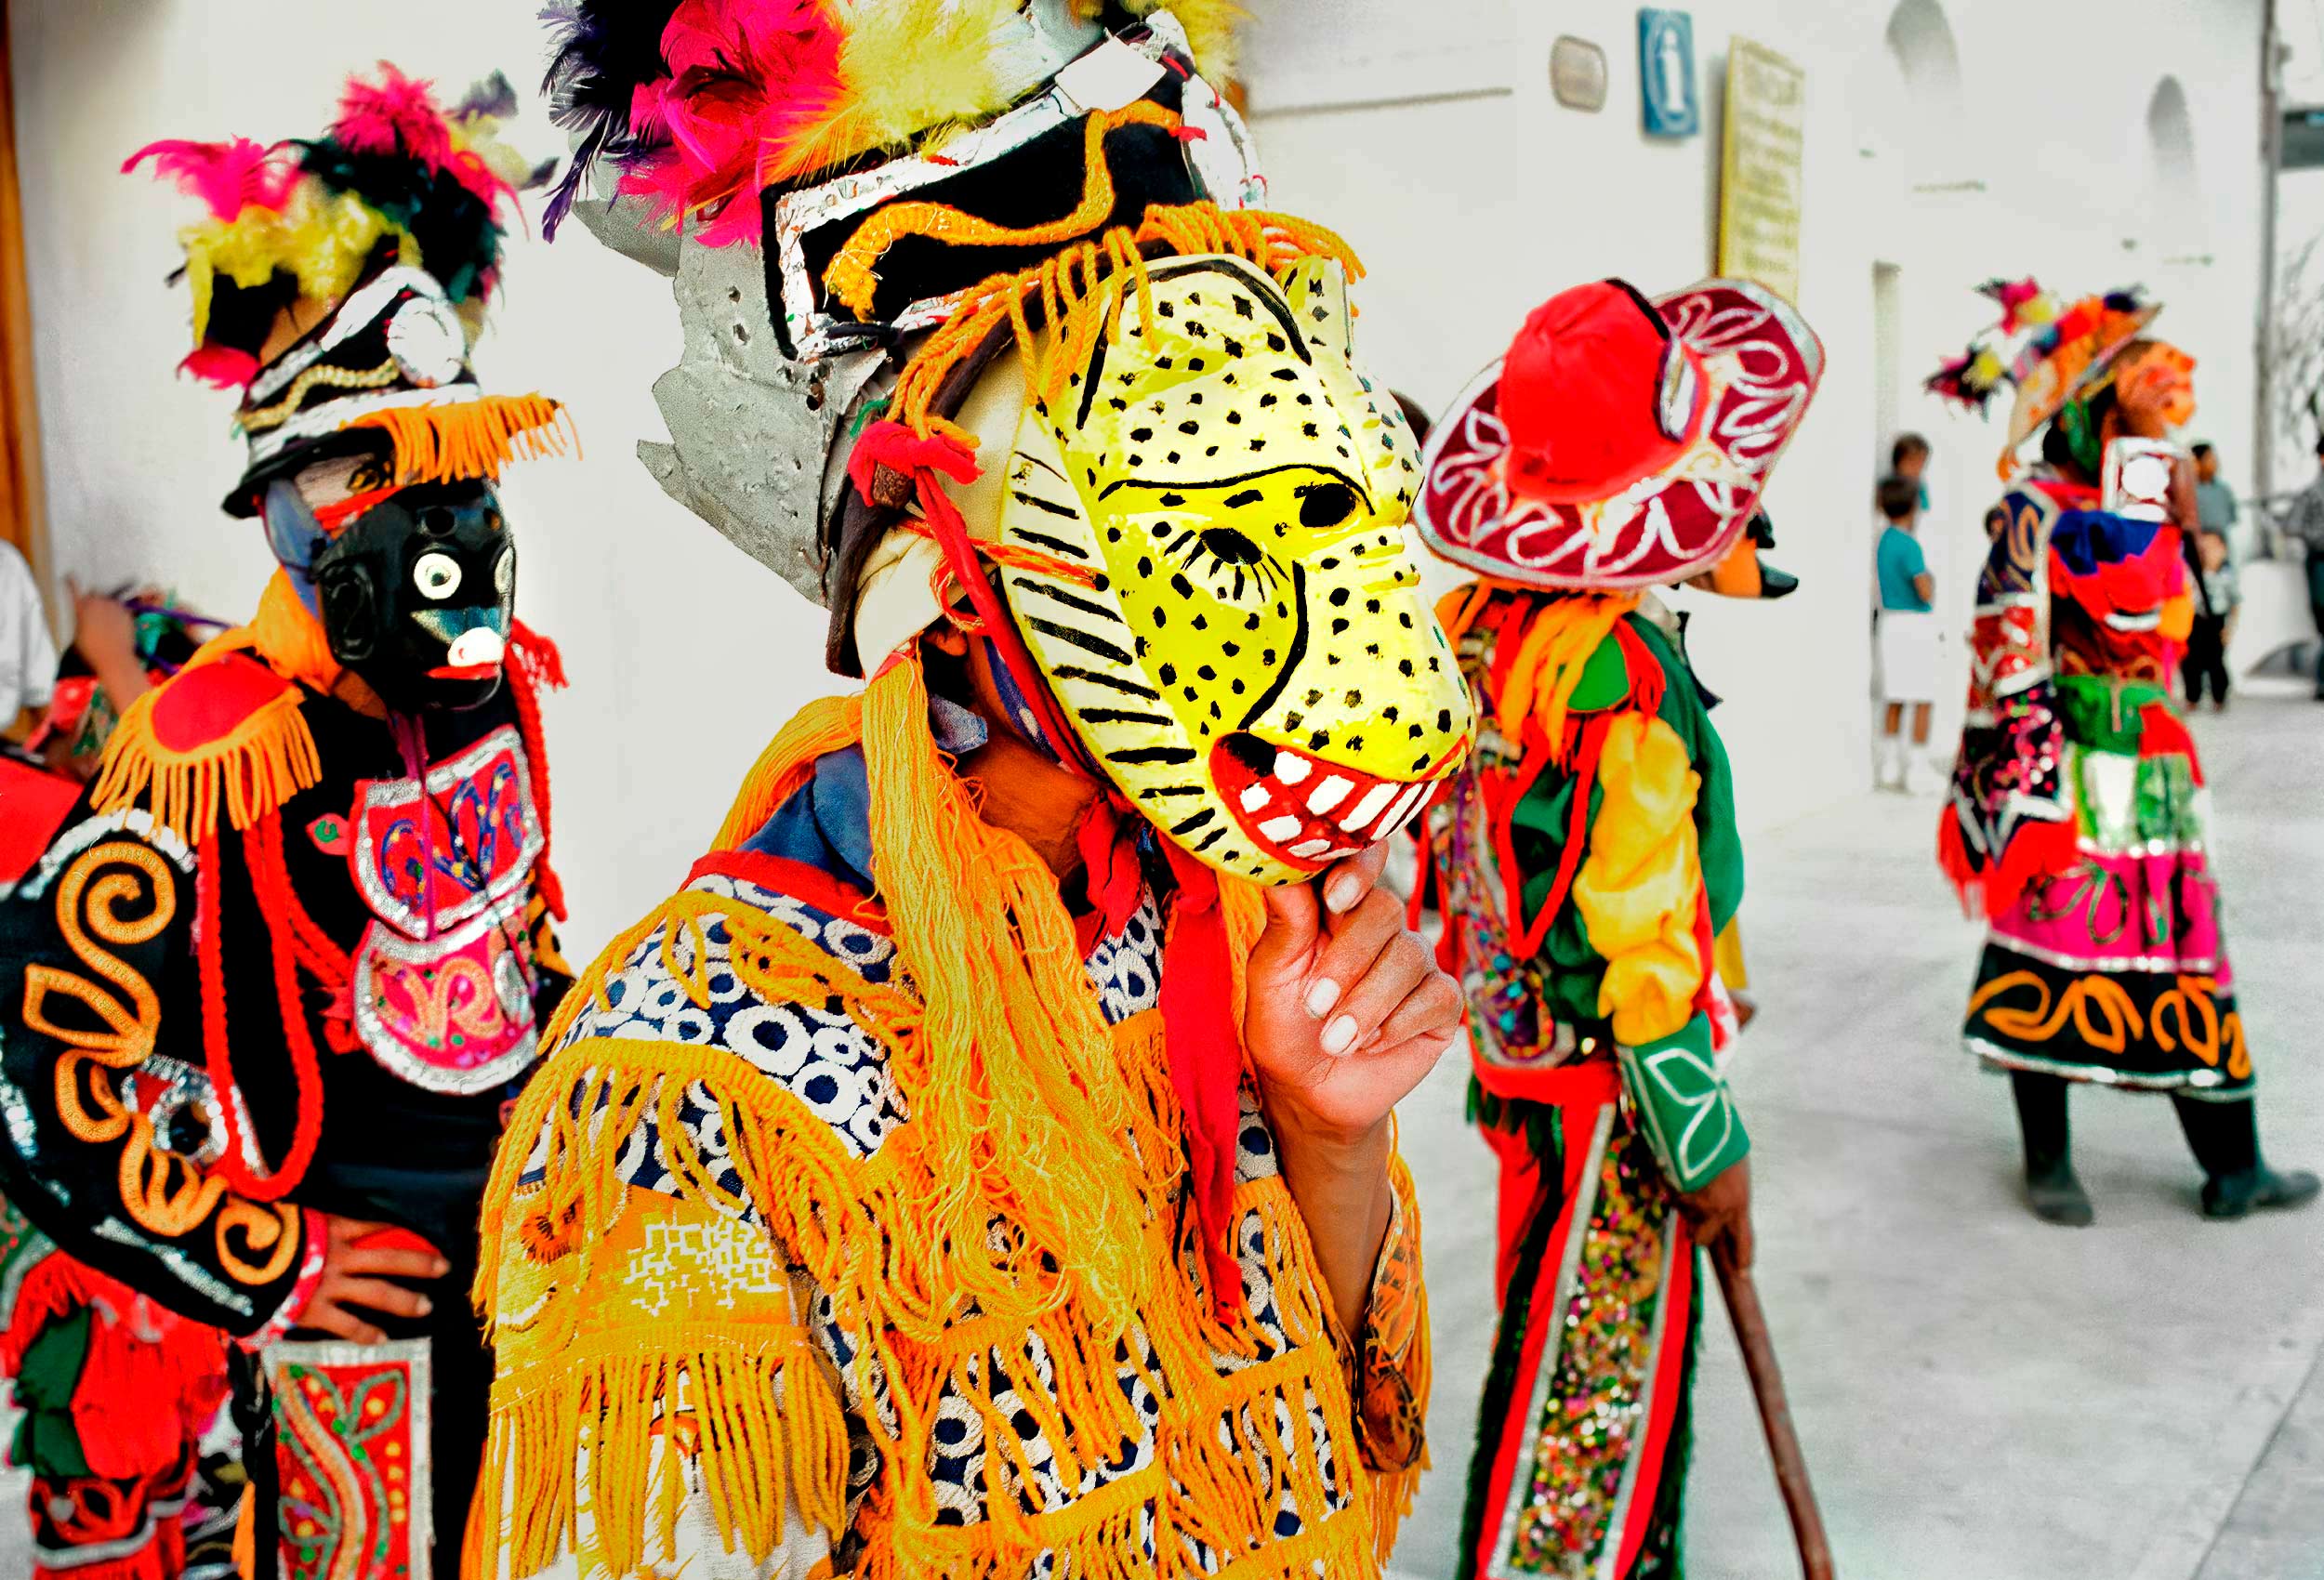 a-group-of-men-wear-masks-and-costumes-during-a-festival-in-flores-guatemala